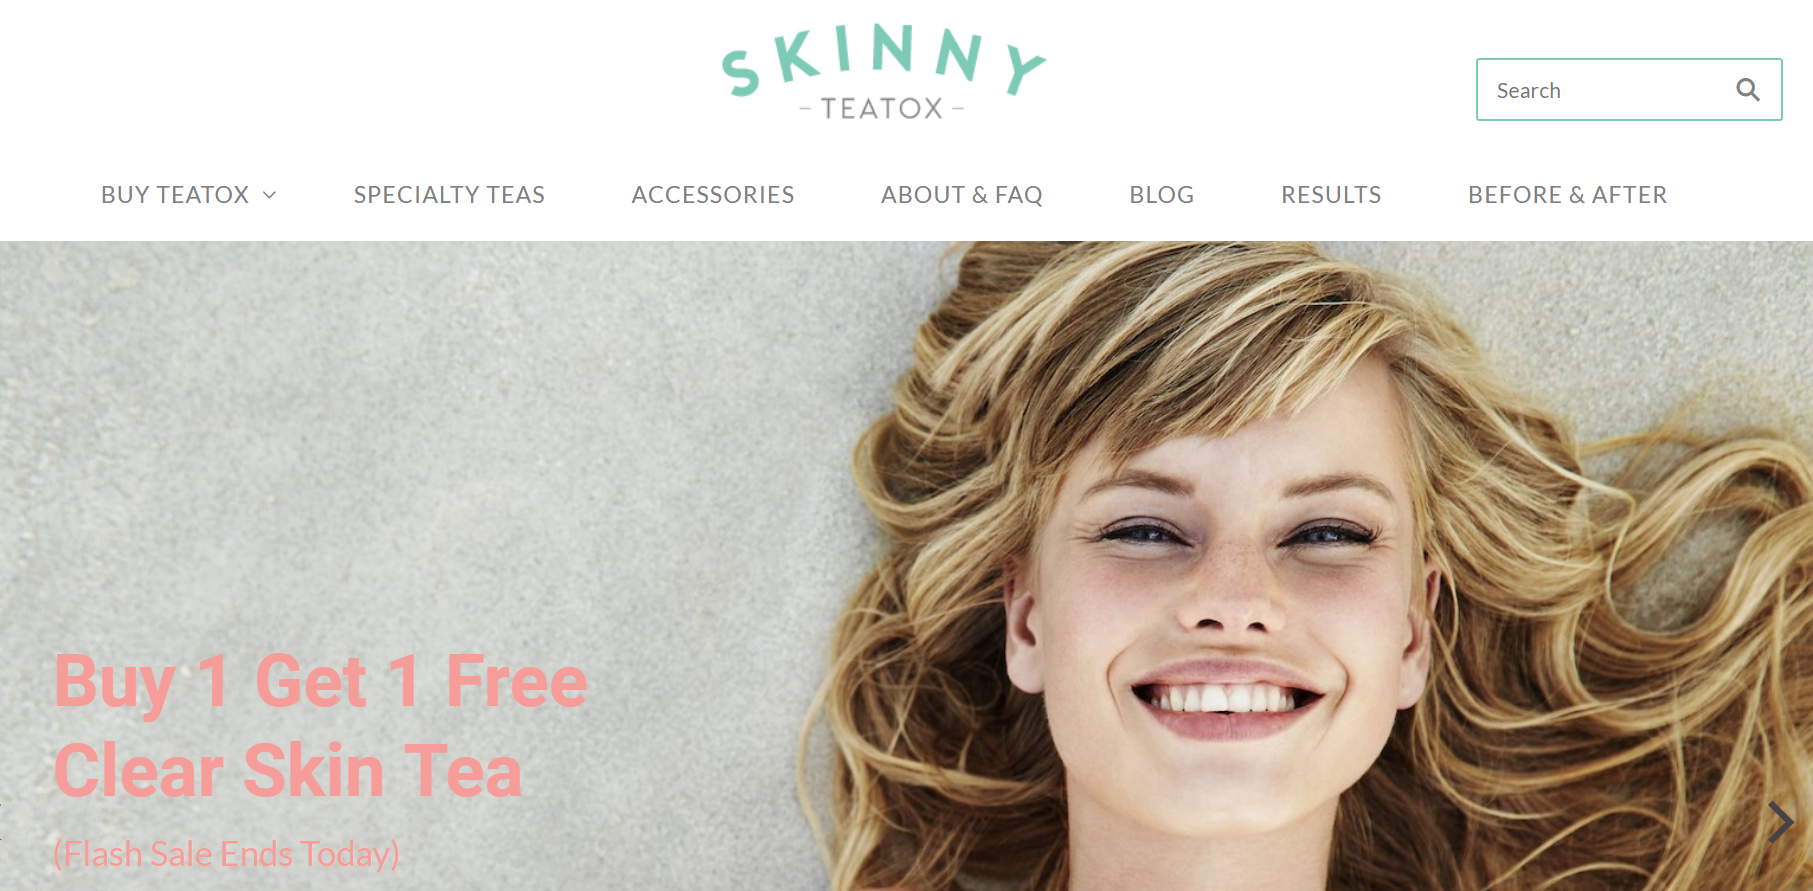 A screenshot of Skinny Teatox's online store showing a flash sale ecommerce promotion.